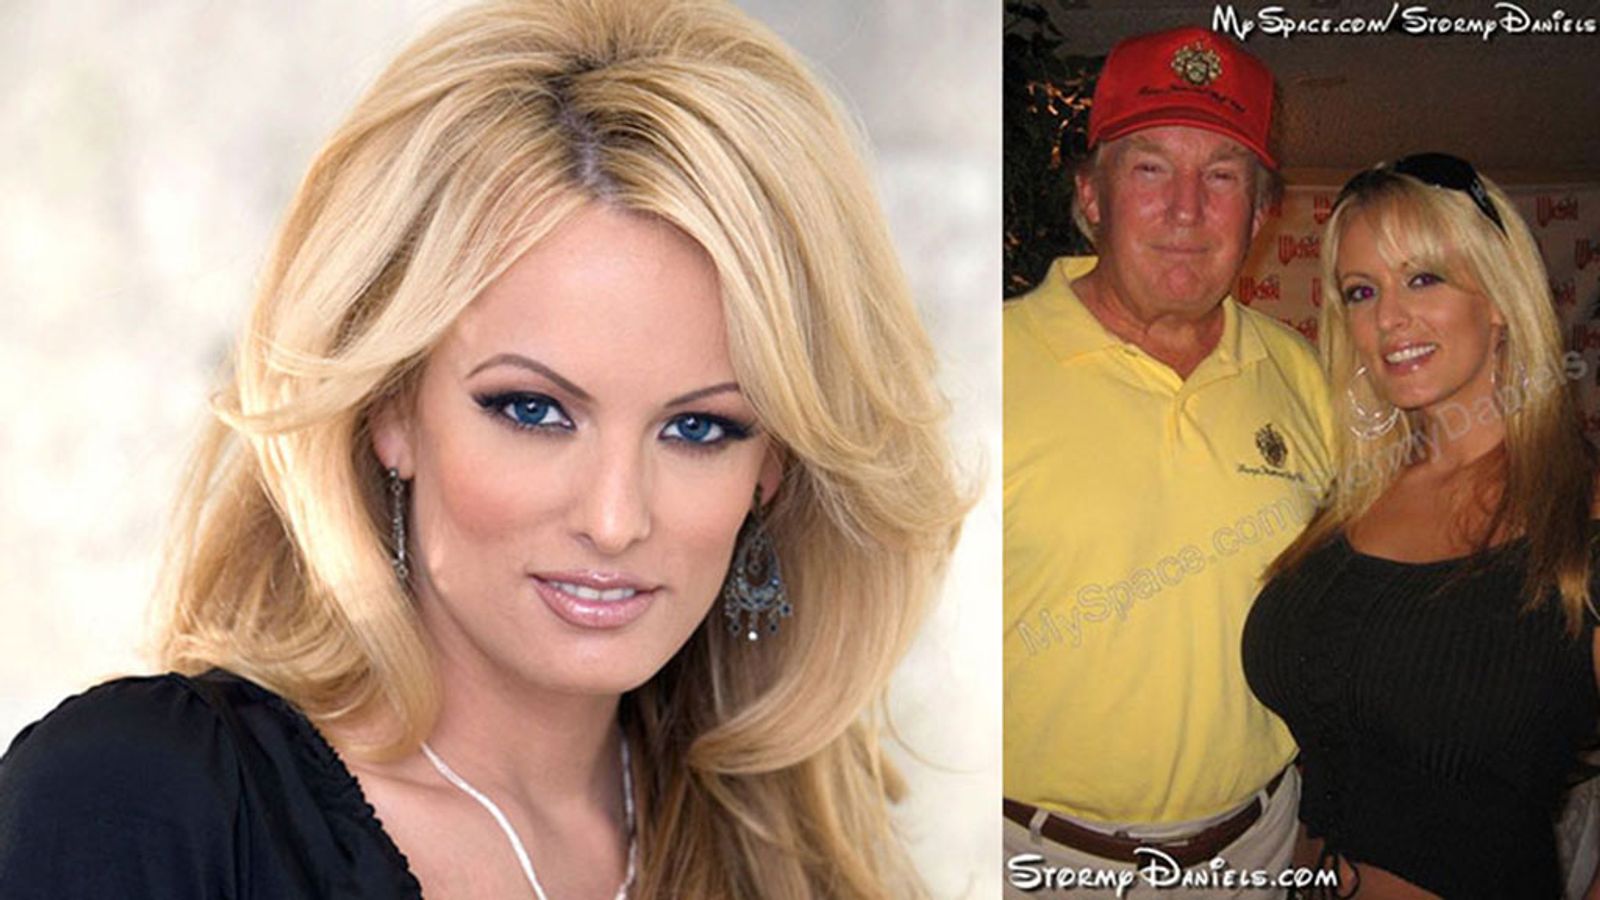 bernie hesse recommends Stormy Daniels Nude Pics